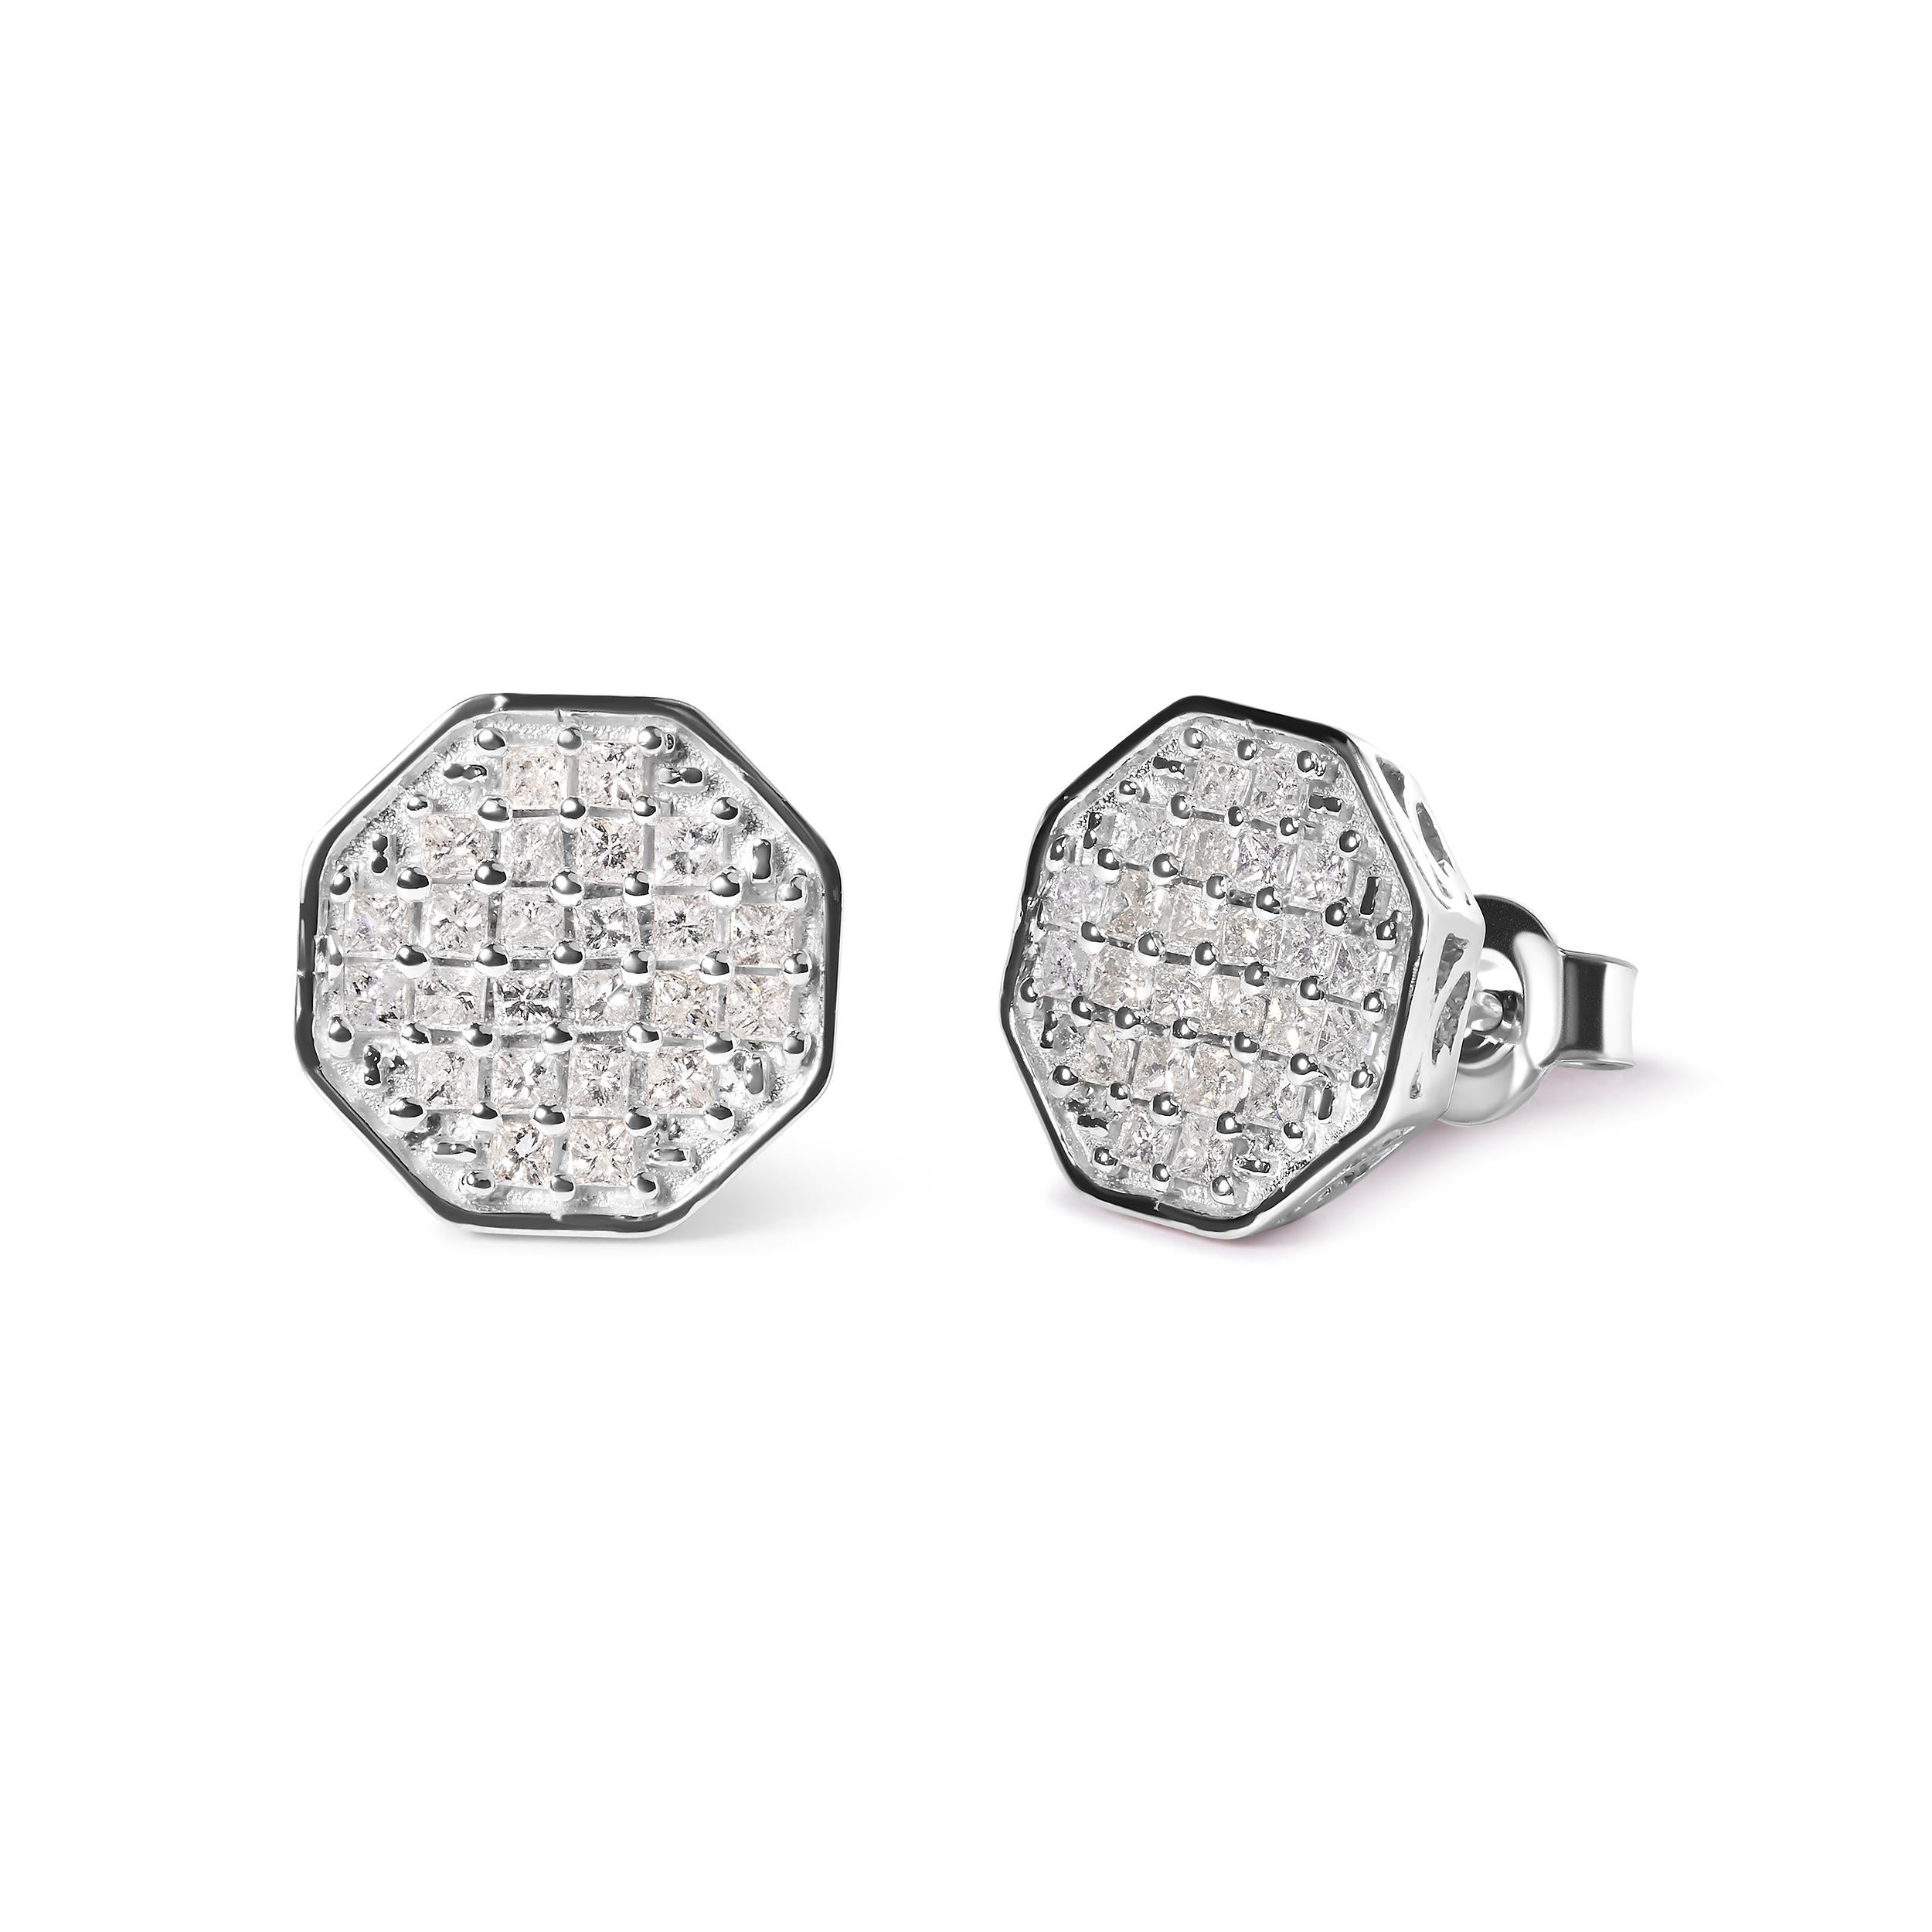 Indulge in the ultimate luxury with these stunning 10K White Gold Princess Diamond Composite Octagon Shaped Stud Earrings. With a total diamond weight of 7/8 cttw and 48 prong-set diamonds, these earrings are sure to catch the eye and turn heads.